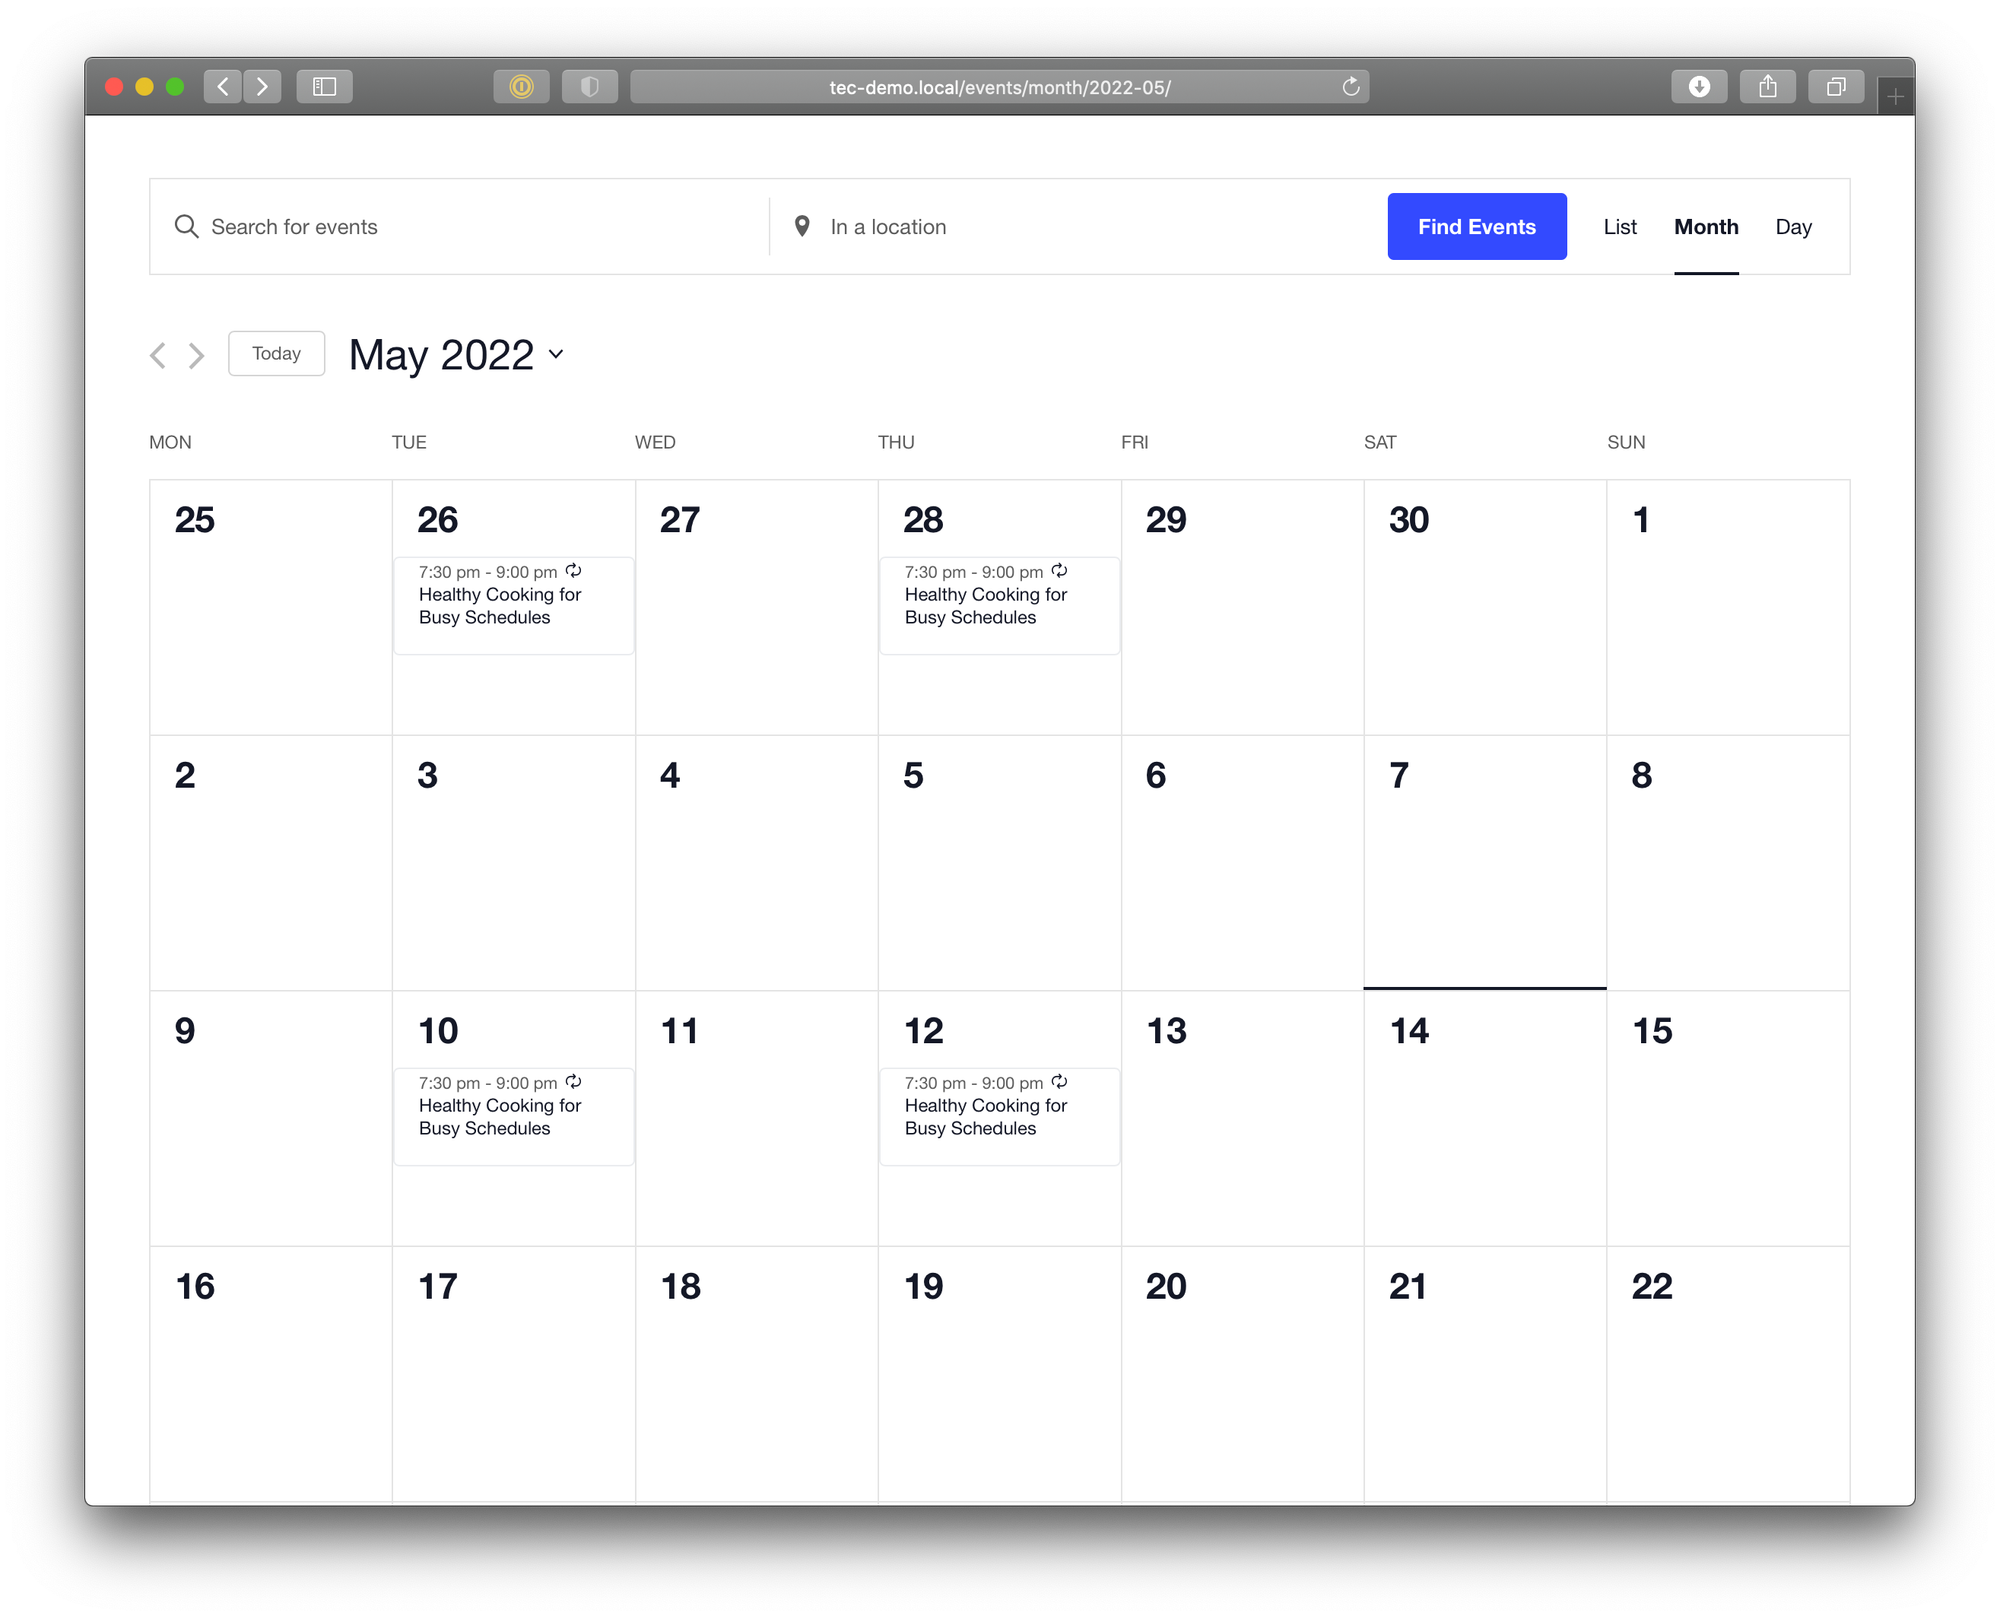 The Events Calendar month view as seen with the Kadence theme activated. There is no header, just the full calendar month view against a white background.